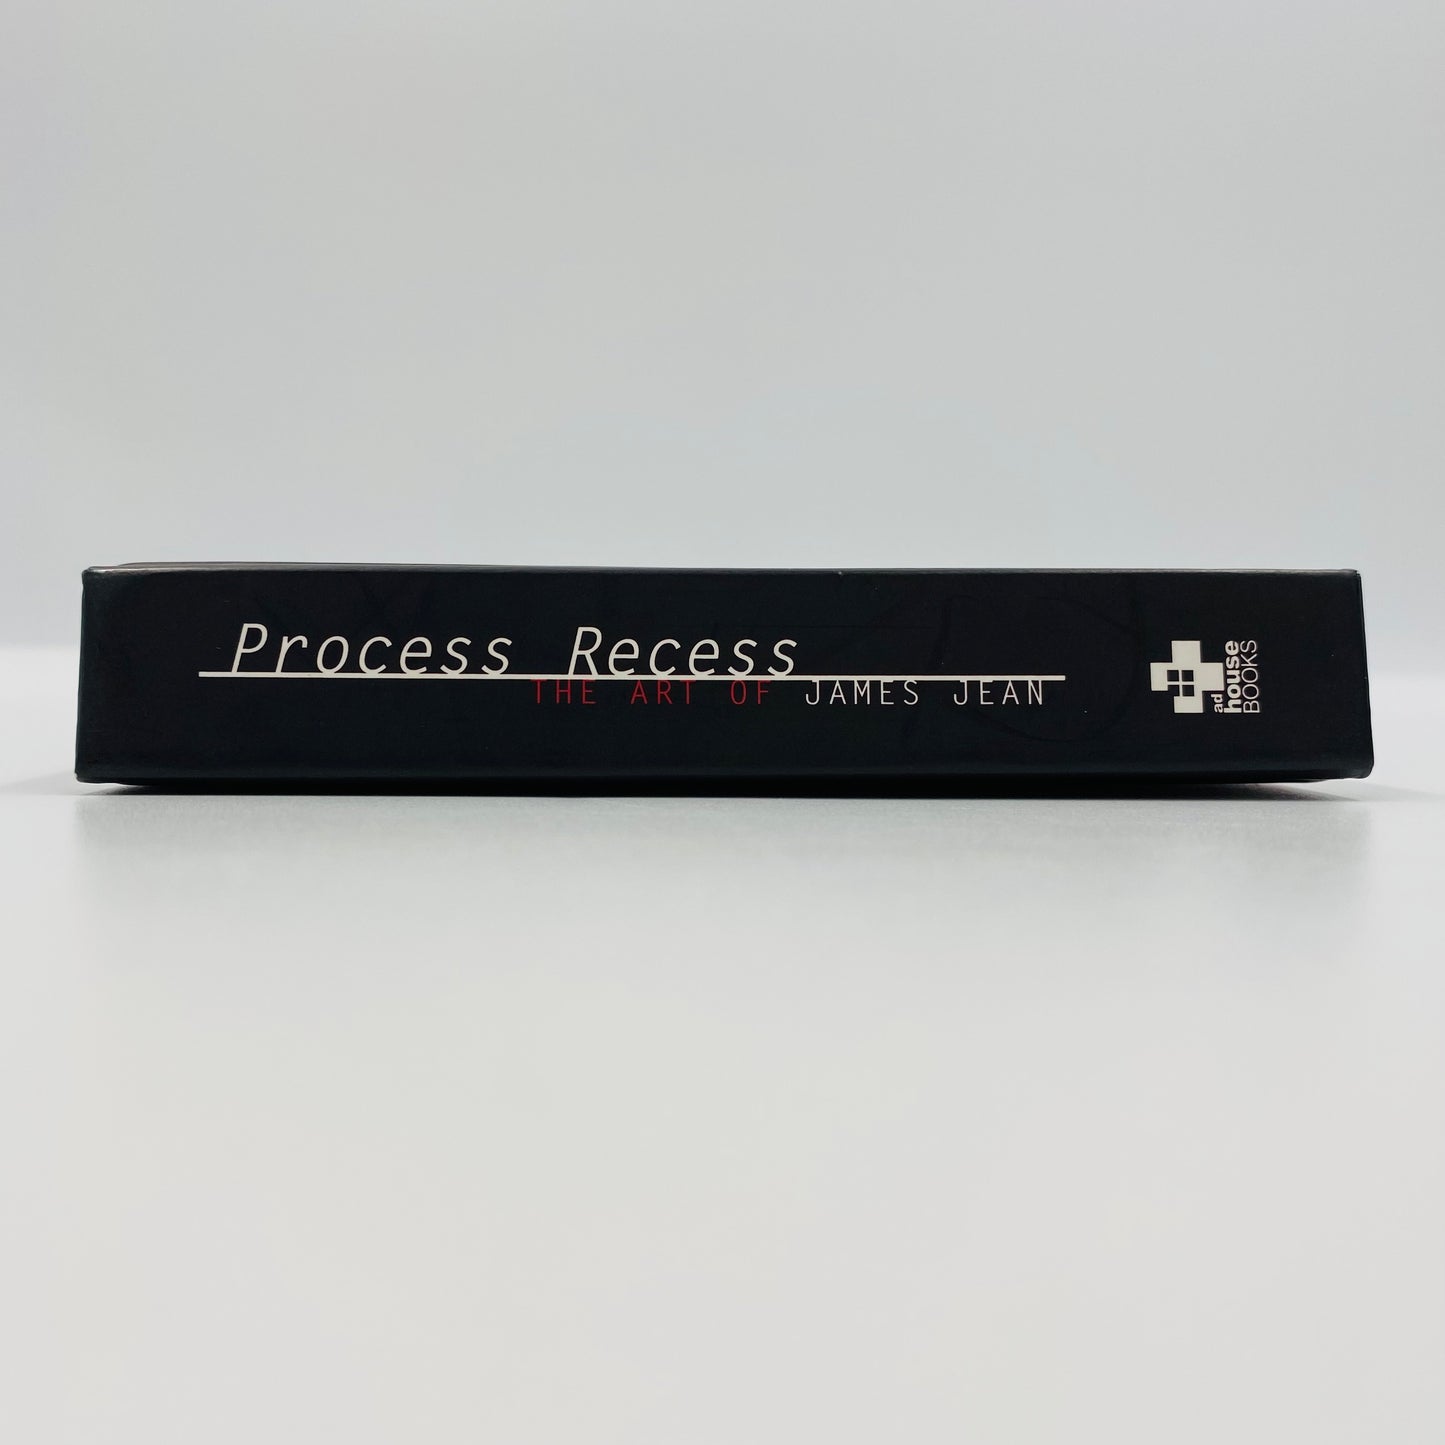 Process Recess James Jean: Selected Paintings Sketchbooks & Illustrations 1999-2004 first printing hardcover (2005) ad house Books